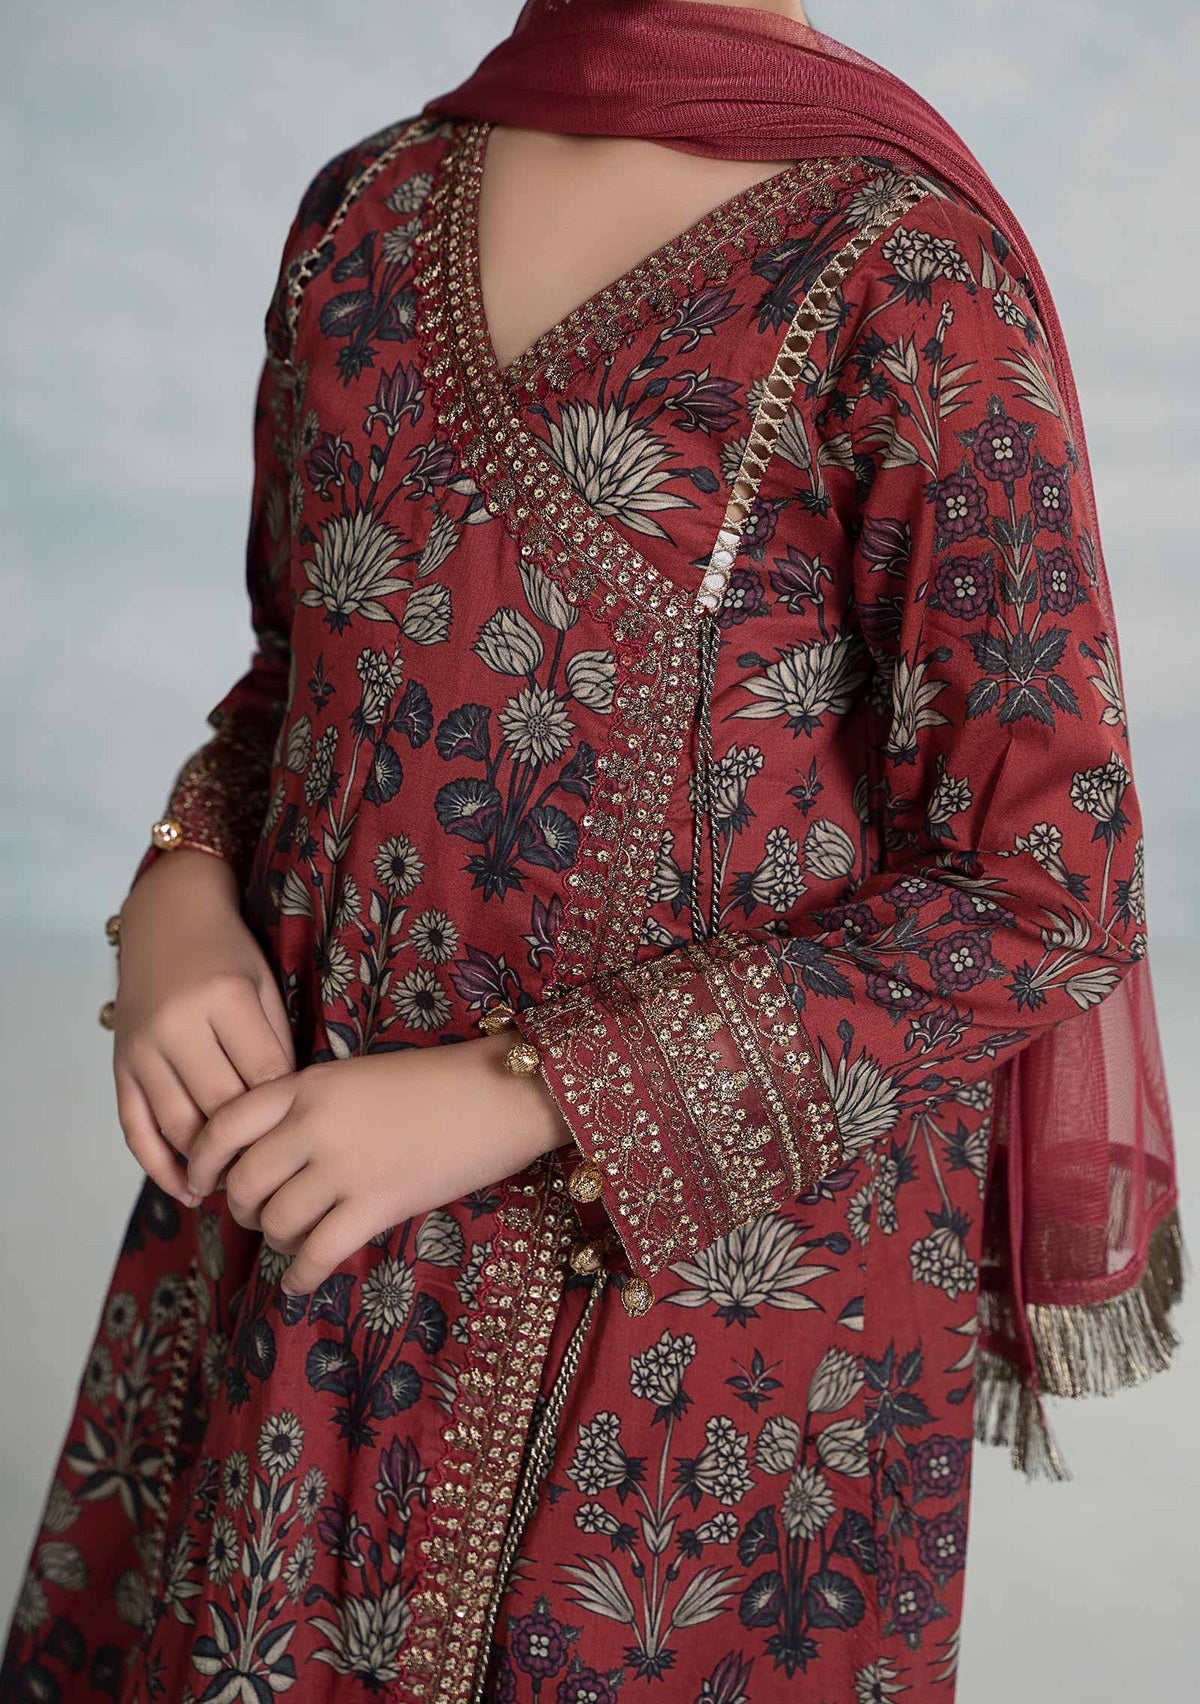 Maria.B Girl's Embroidered Lawn Salwar Suit - db25396